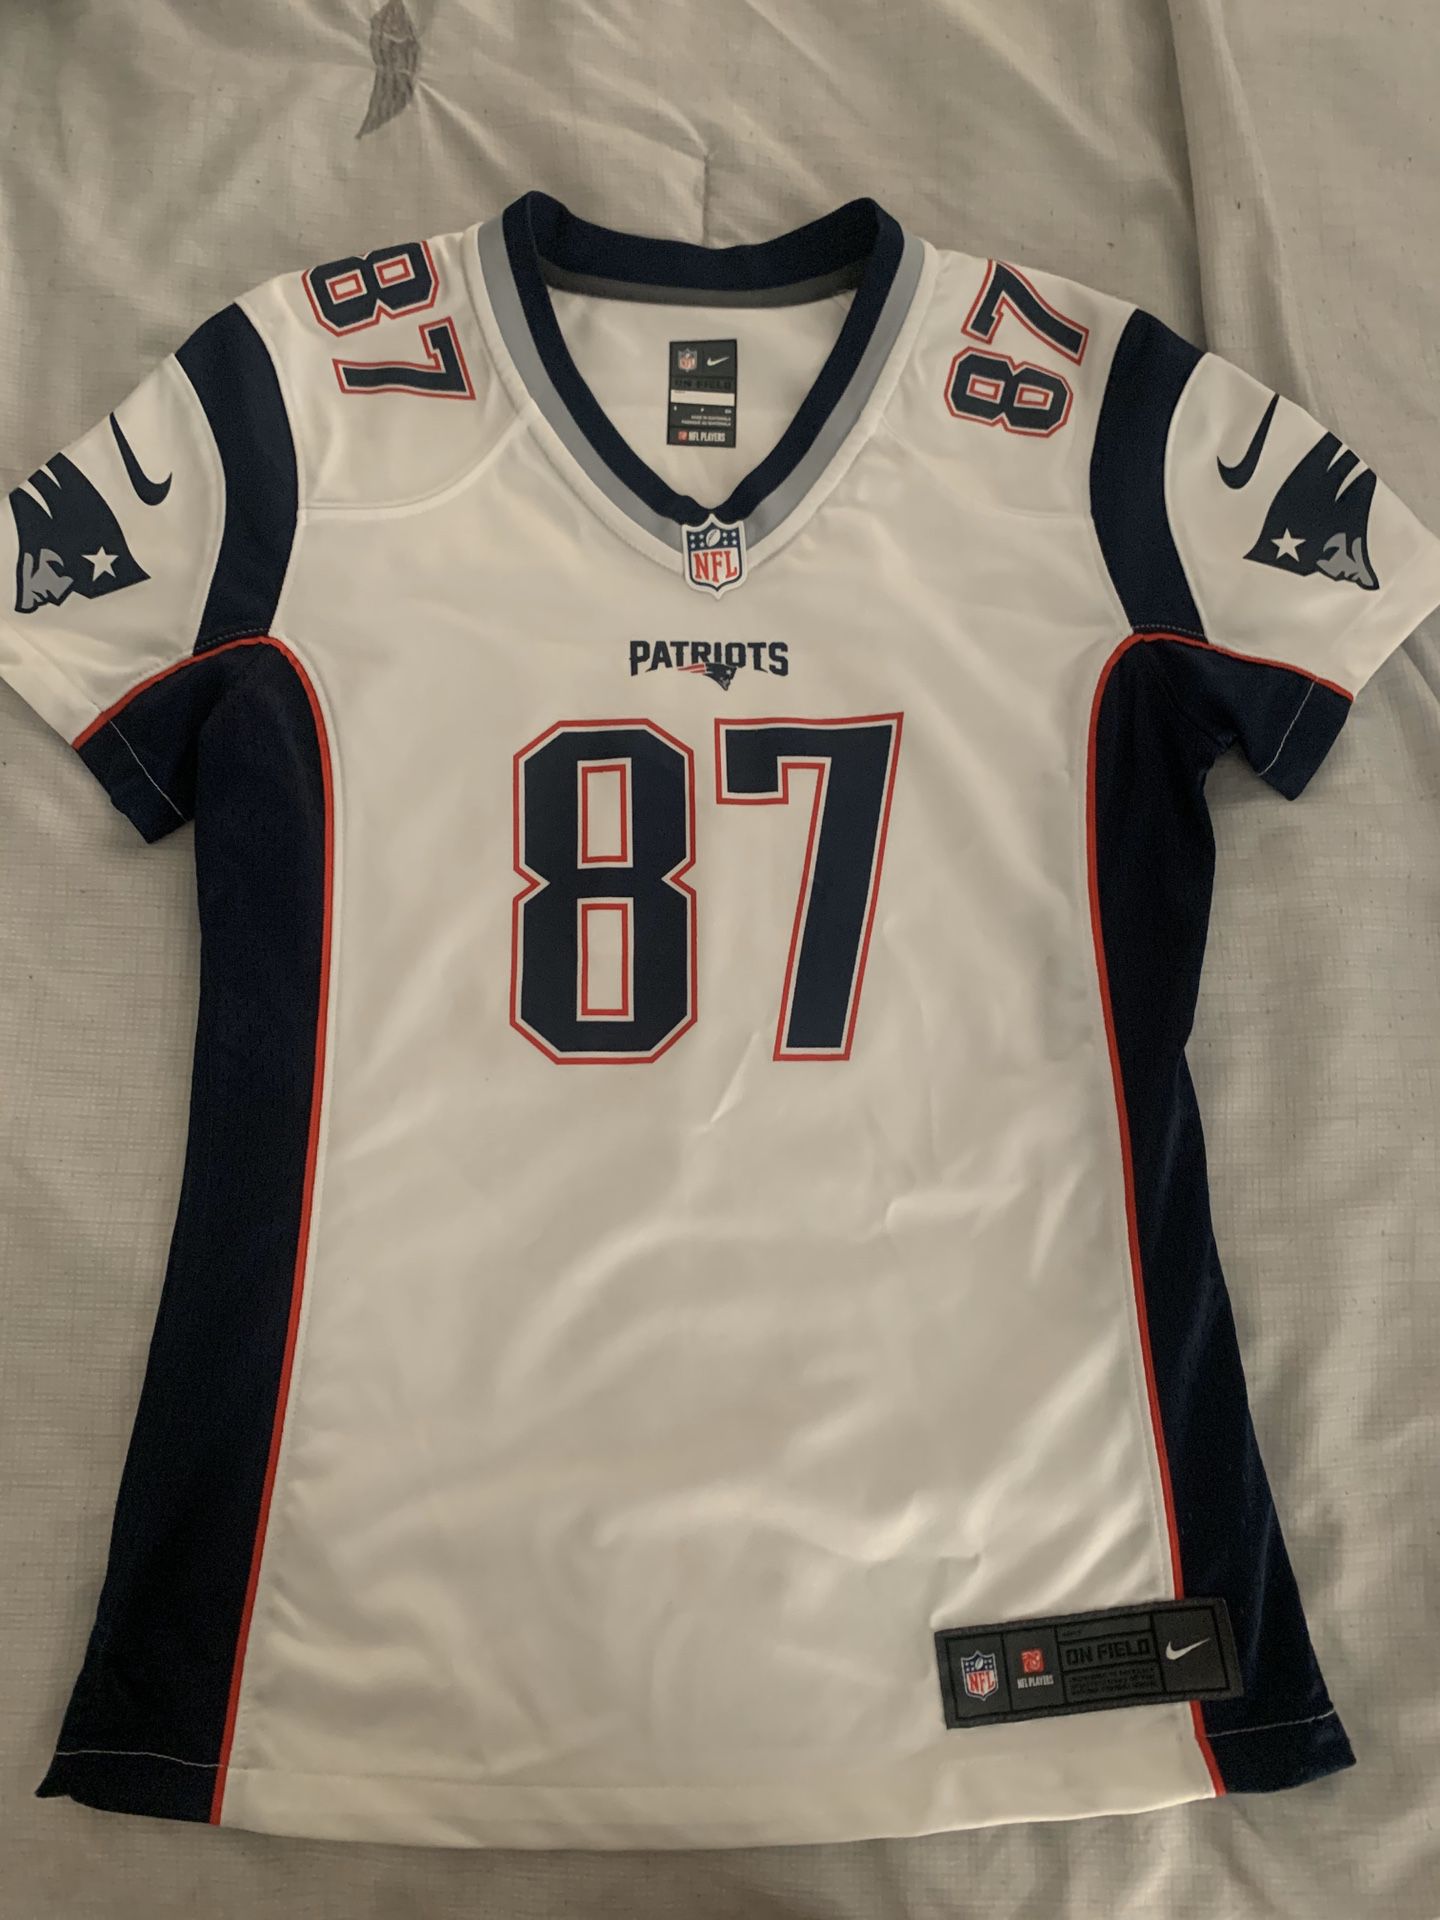 Patriots Jersey in Small